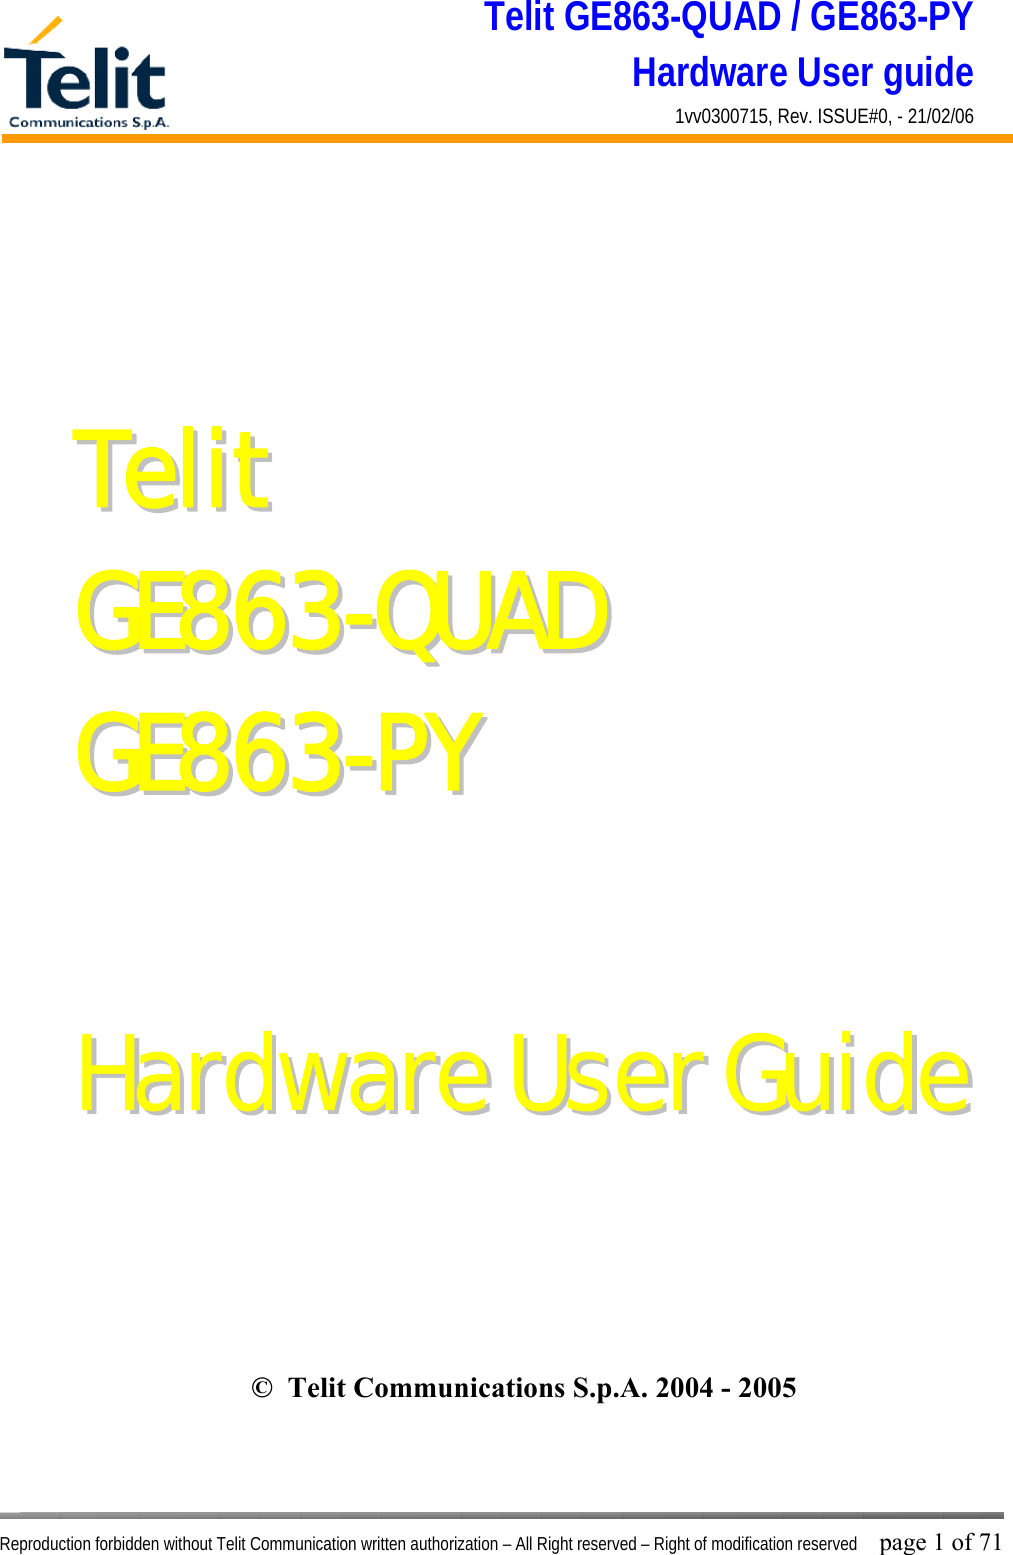 Telit GE863-QUAD / GE863-PY Hardware User guide 1vv0300715, Rev. ISSUE#0, - 21/02/06    Reproduction forbidden without Telit Communication written authorization – All Right reserved – Right of modification reserved page 1 of 71 TTeelliitt  GGEE886633--QQUUAADD  GGEE886633--PPYY      HHaarrddwwaarree  UUsseerr  GGuuiiddee ©  Telit Communications S.p.A. 2004 - 2005  